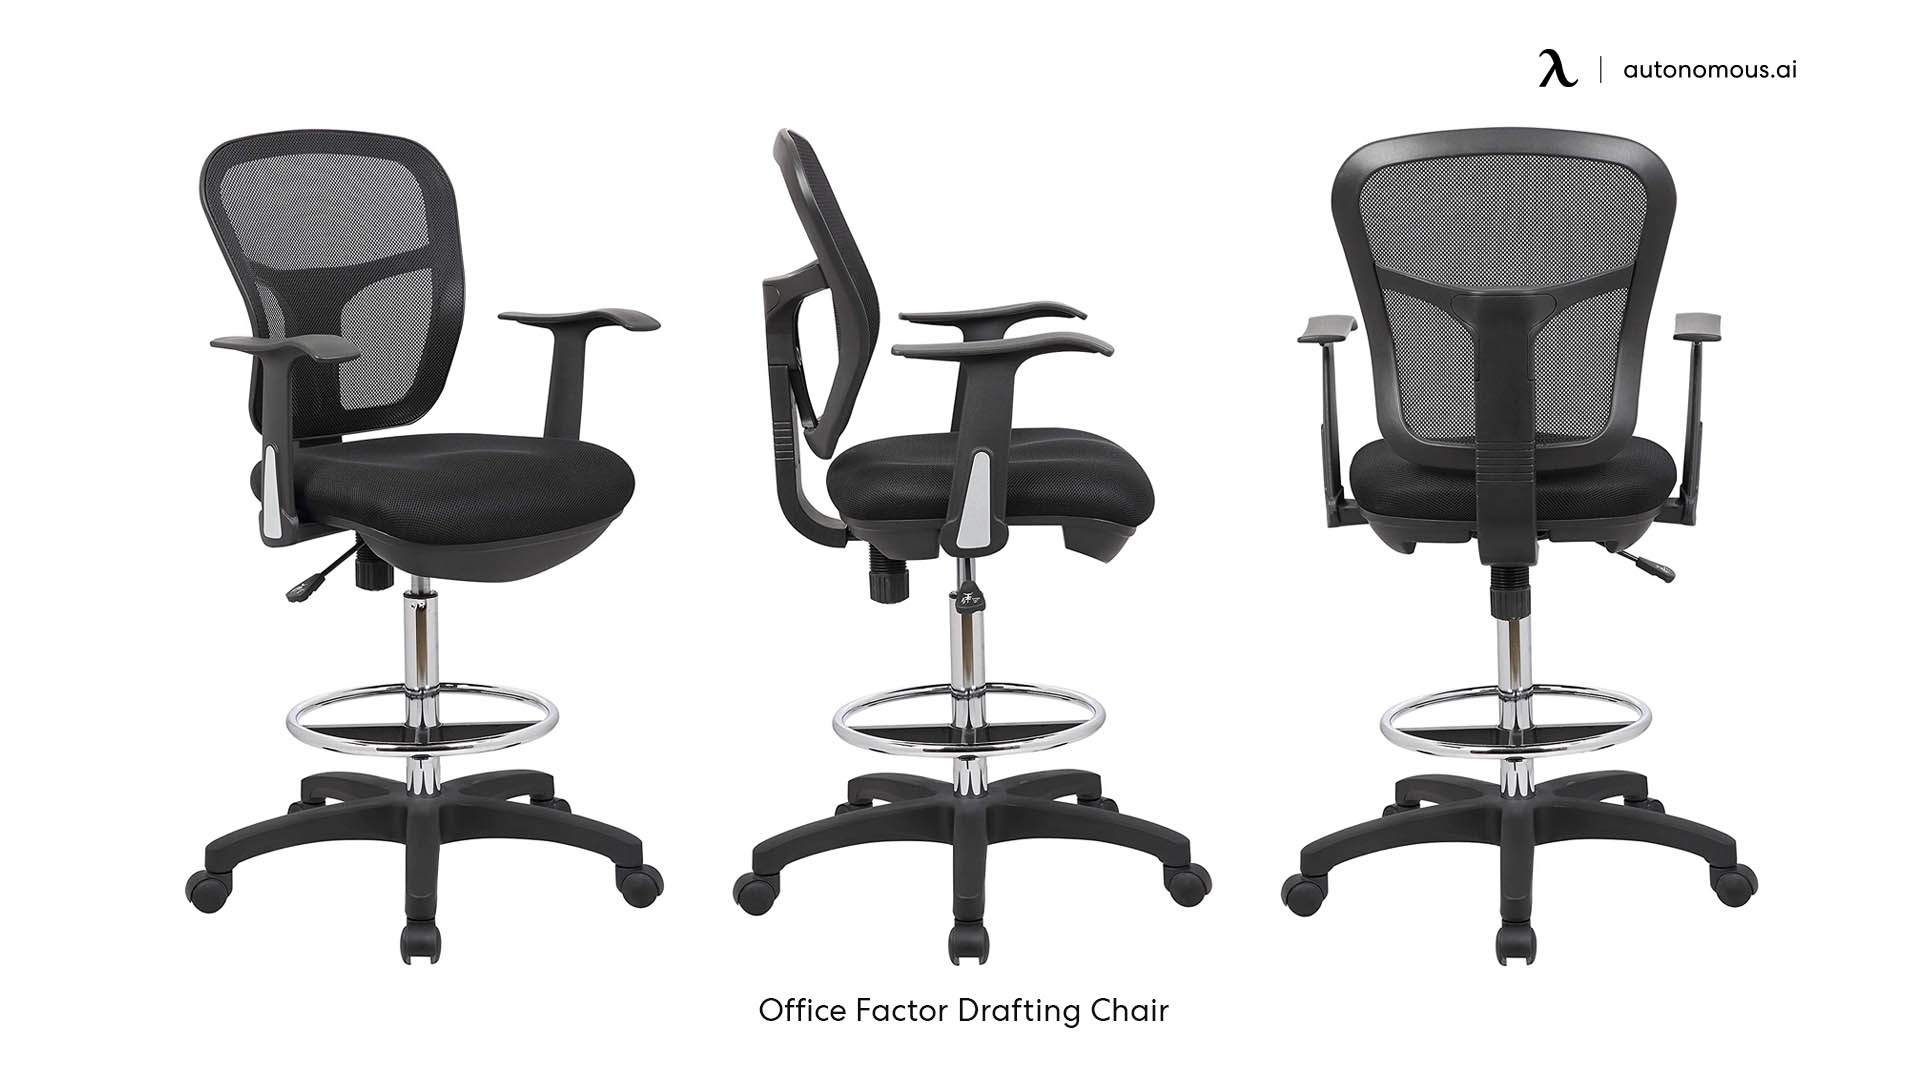 Office Factor Drafting Chair